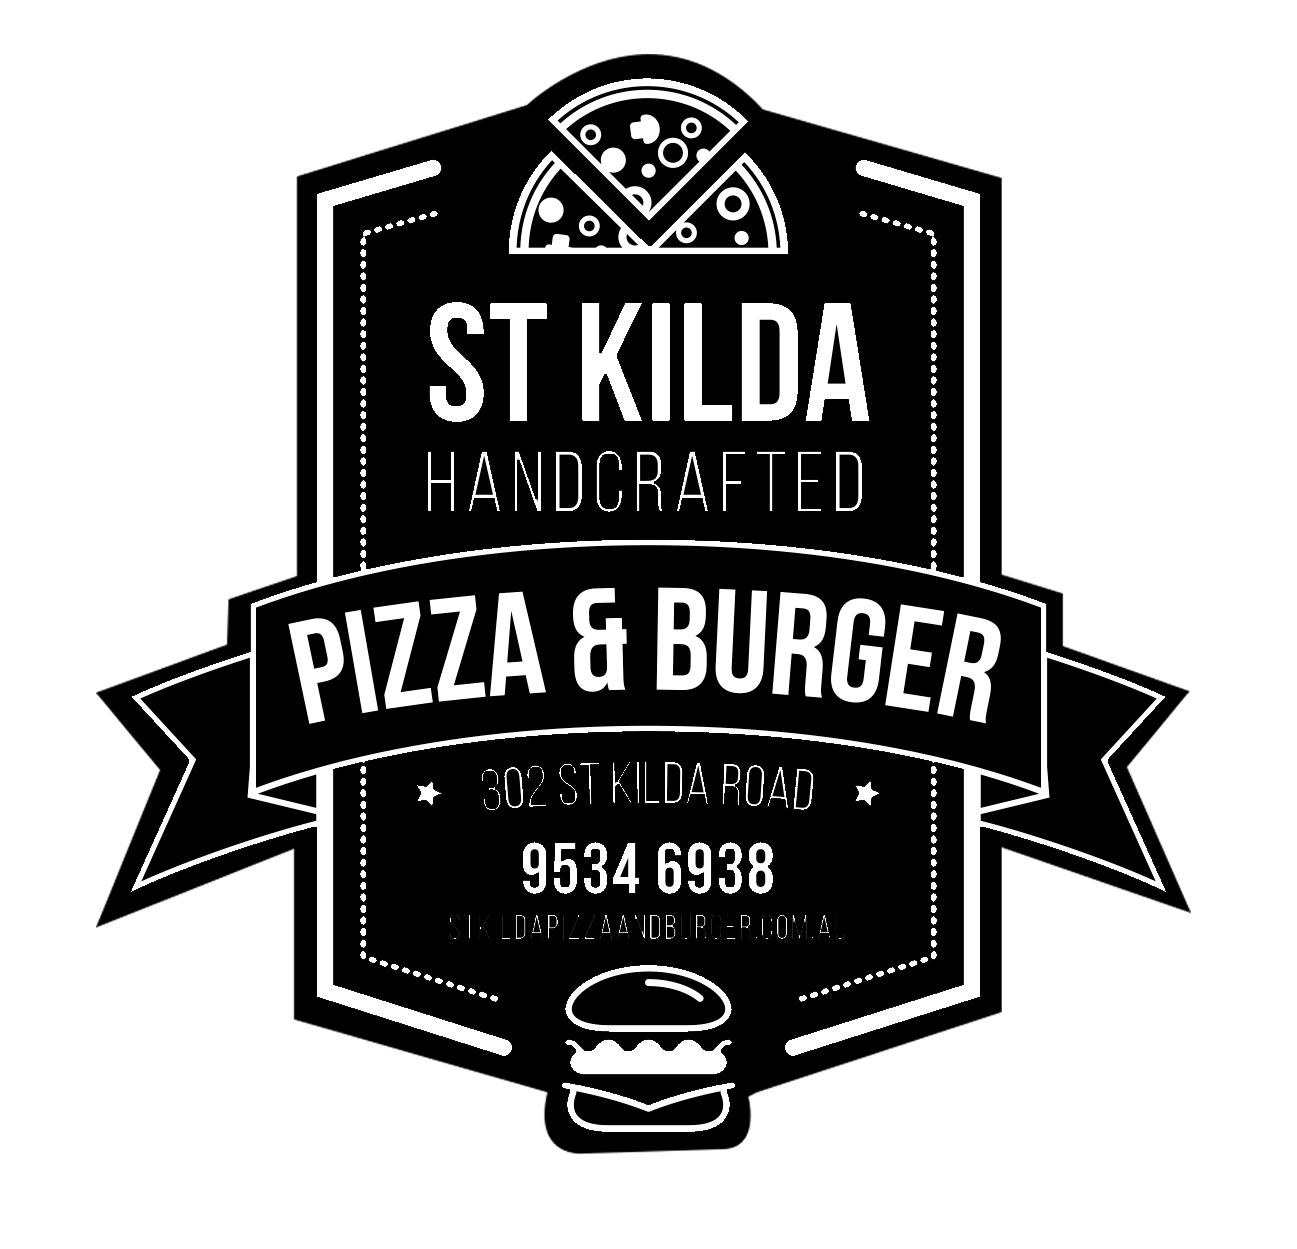 St Kilda Handcrafted Pizza and Burger